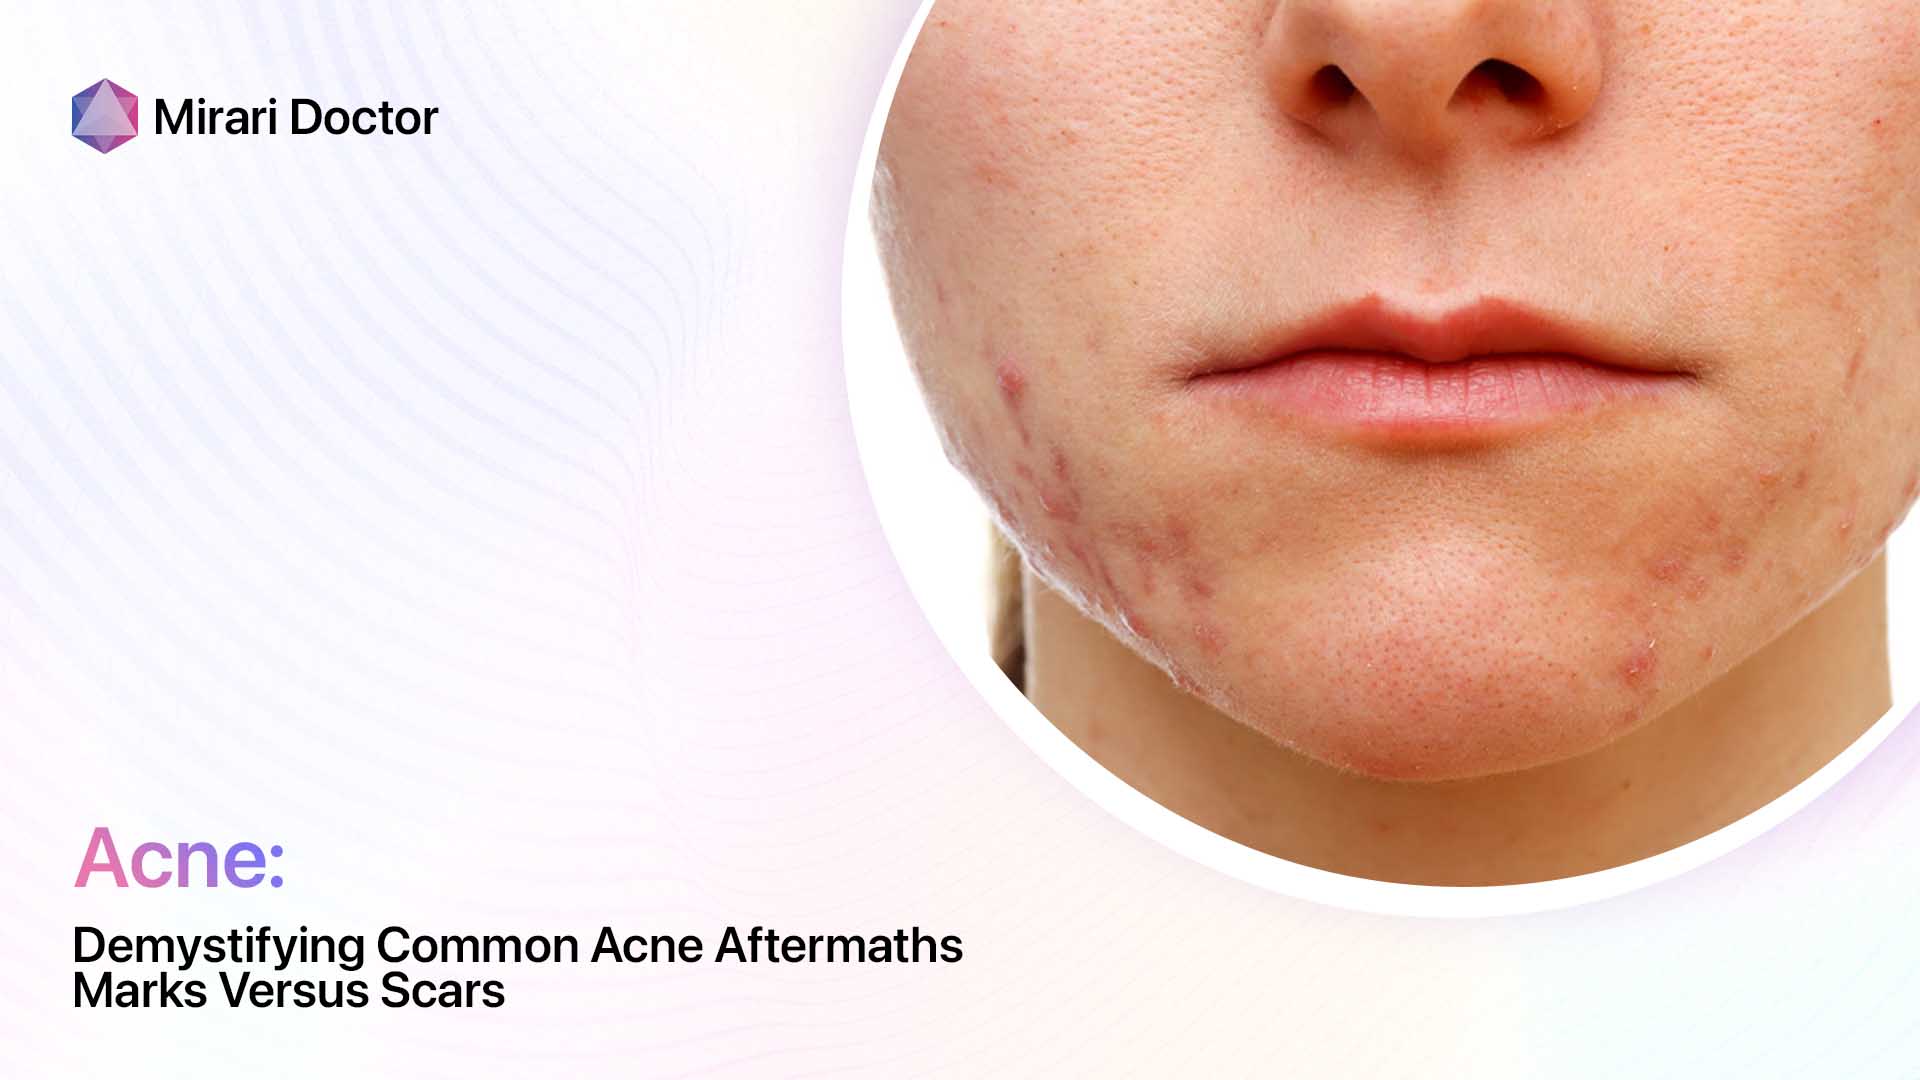 Demystifying Common Acne Aftermaths Marks Versus Scars